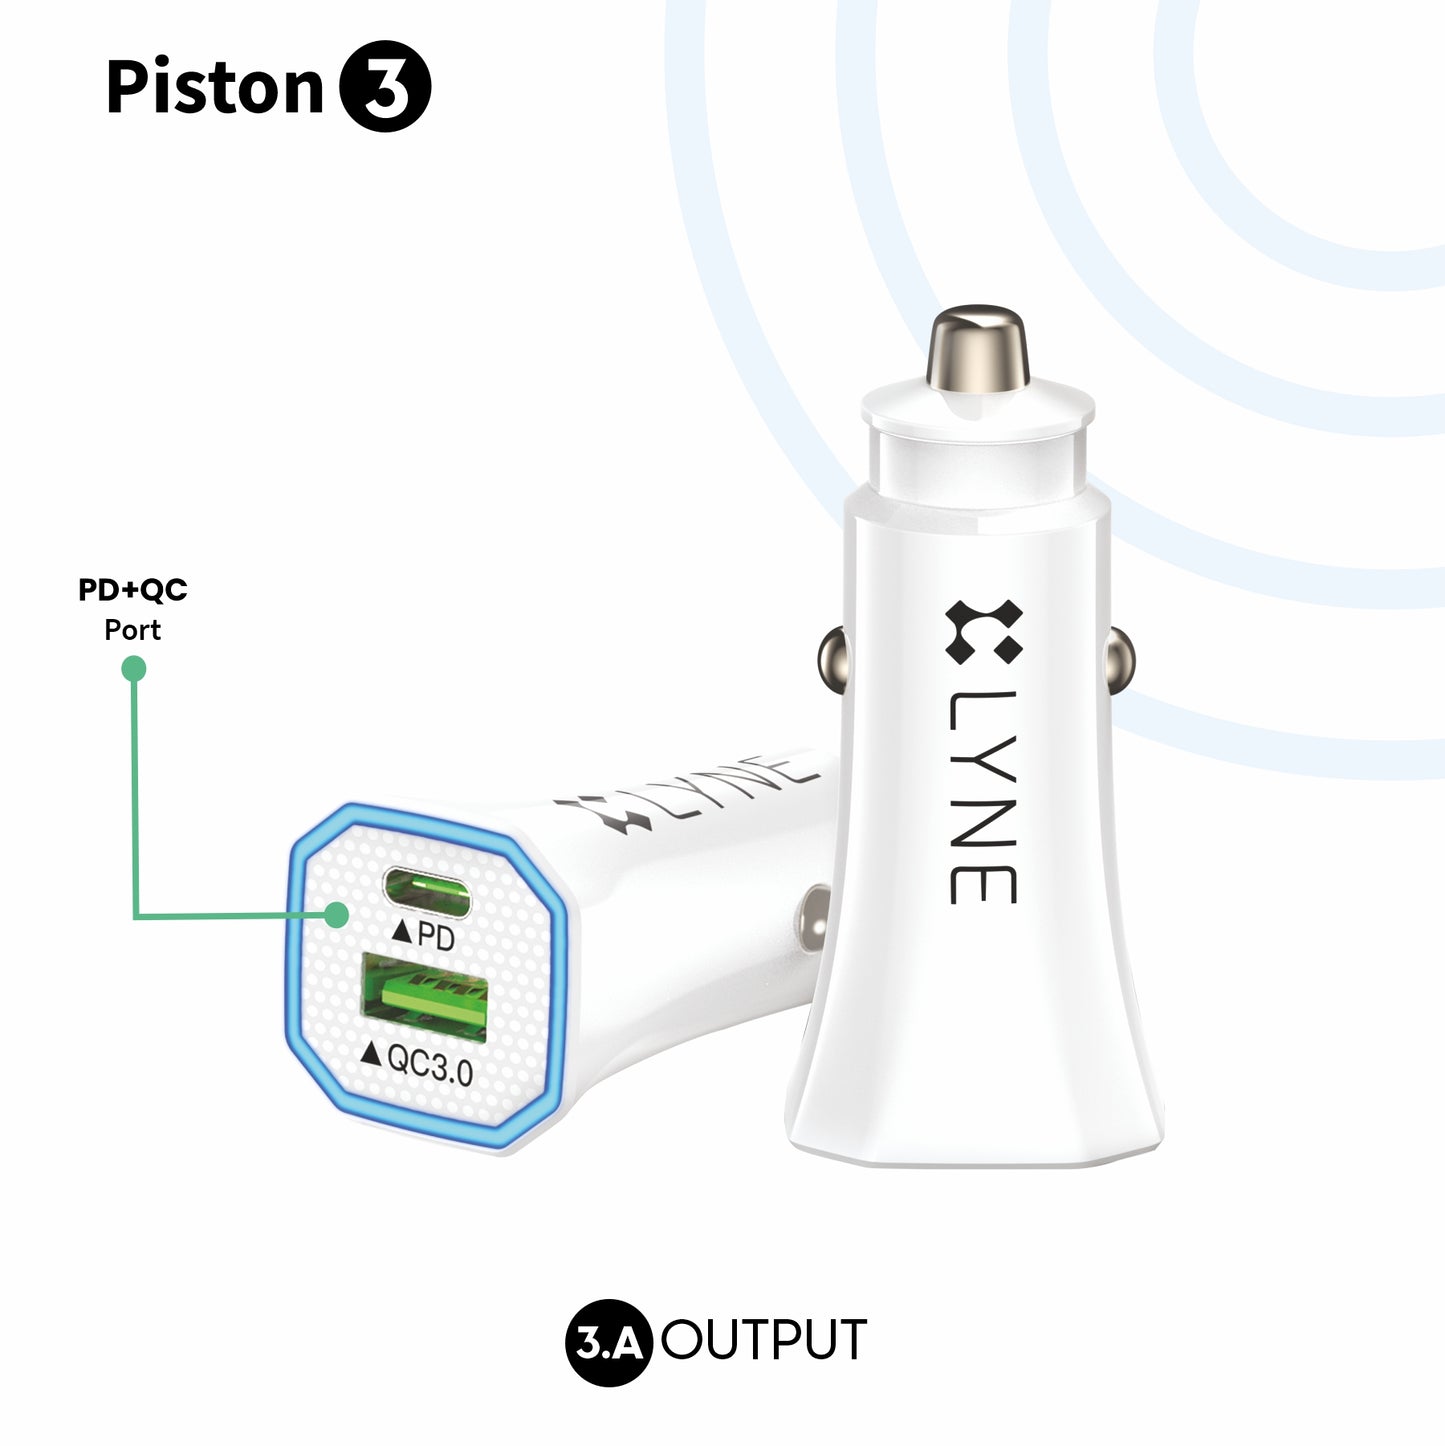 LYNE Piston 3 3A Output, With Cable, PD + QC Port, LED Indicator